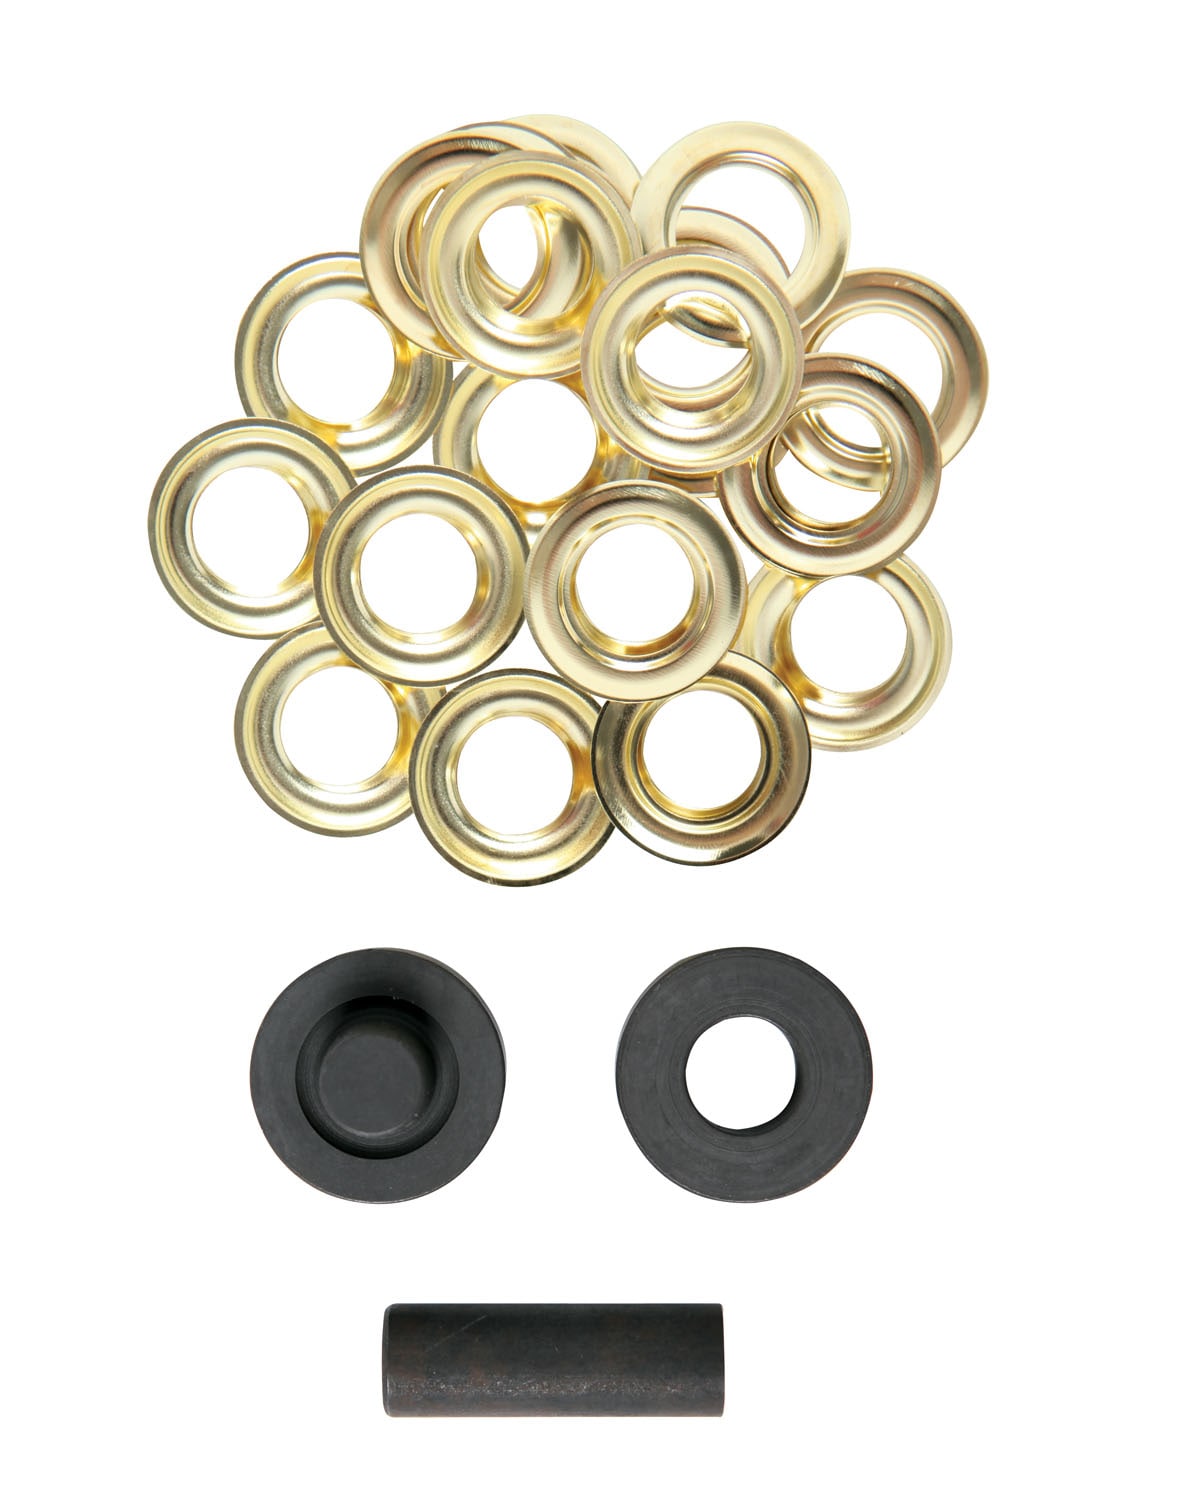 VHOIC 103pcs Hole Punch Metal Grommets for Tarps, Fabric, Tent Heavy Duty  Brass Grommet Kit Eyelet Grommets Grommet Tools 1/2 inch